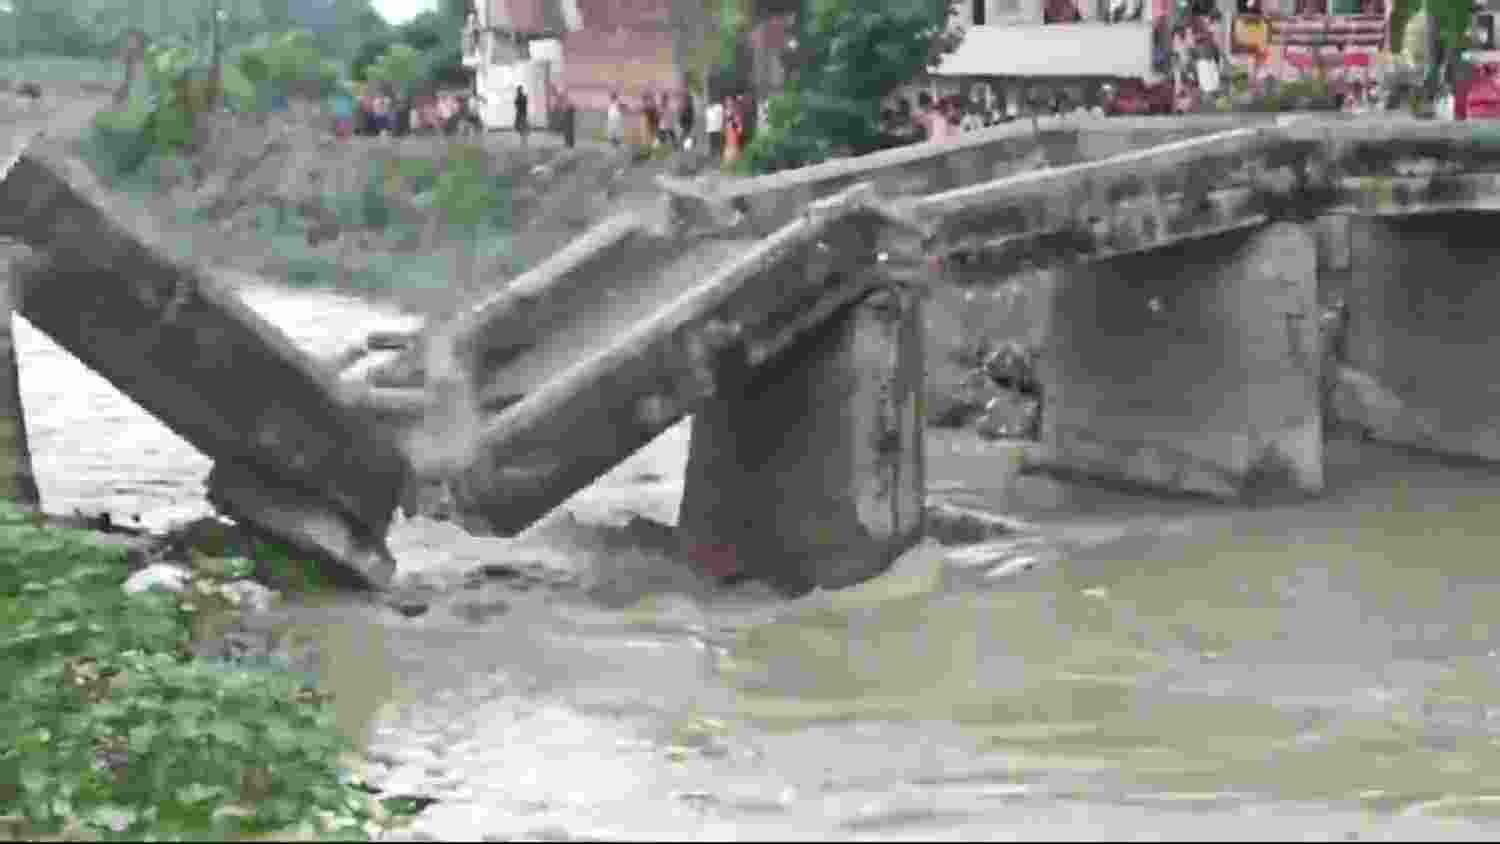 Another bridge collapses in Bihar, 10th in 15 days